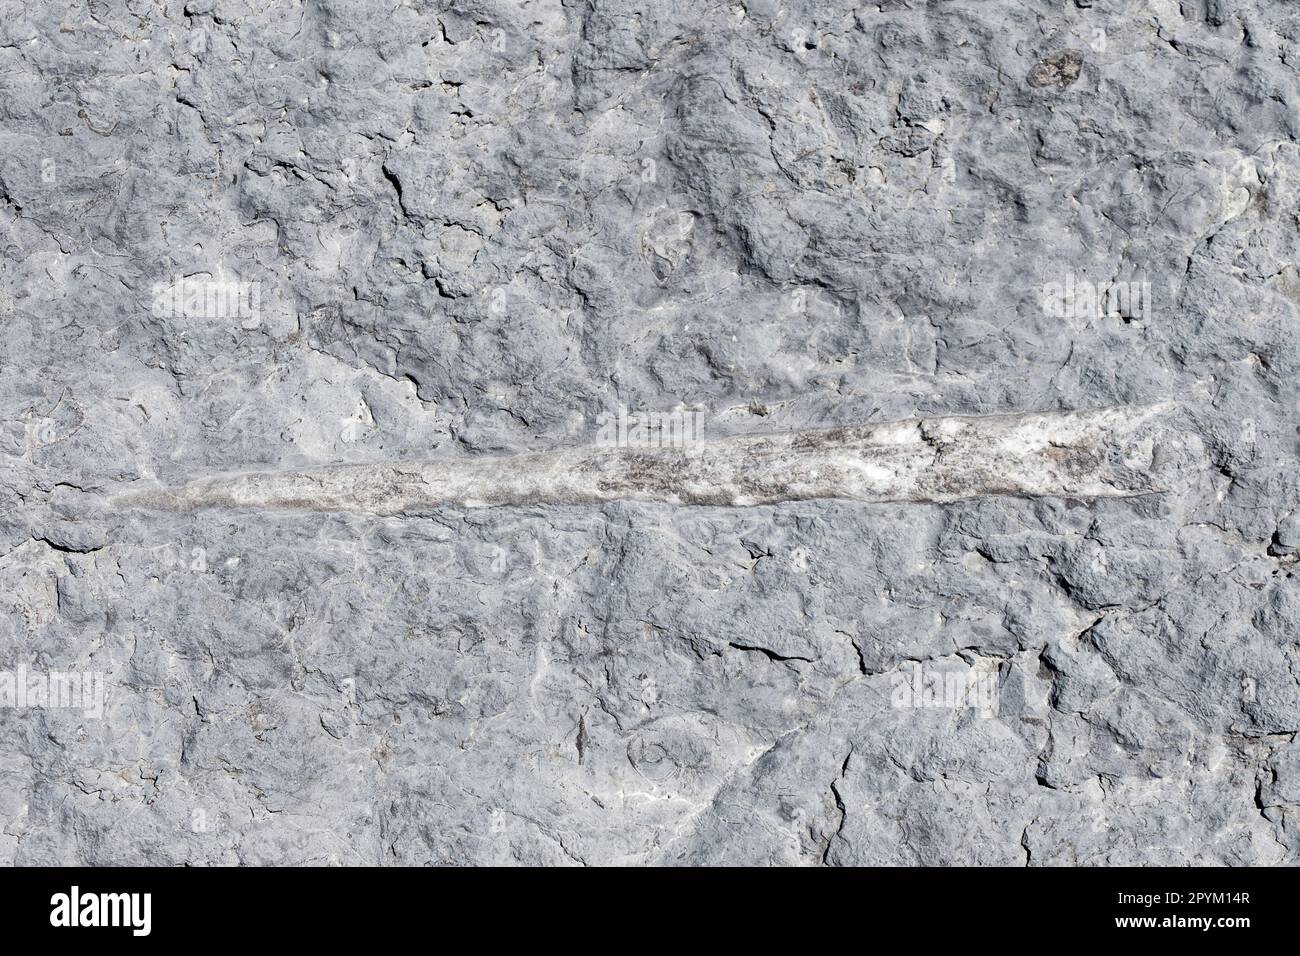 A close up of a fossilized cephalopod. Stock Photo